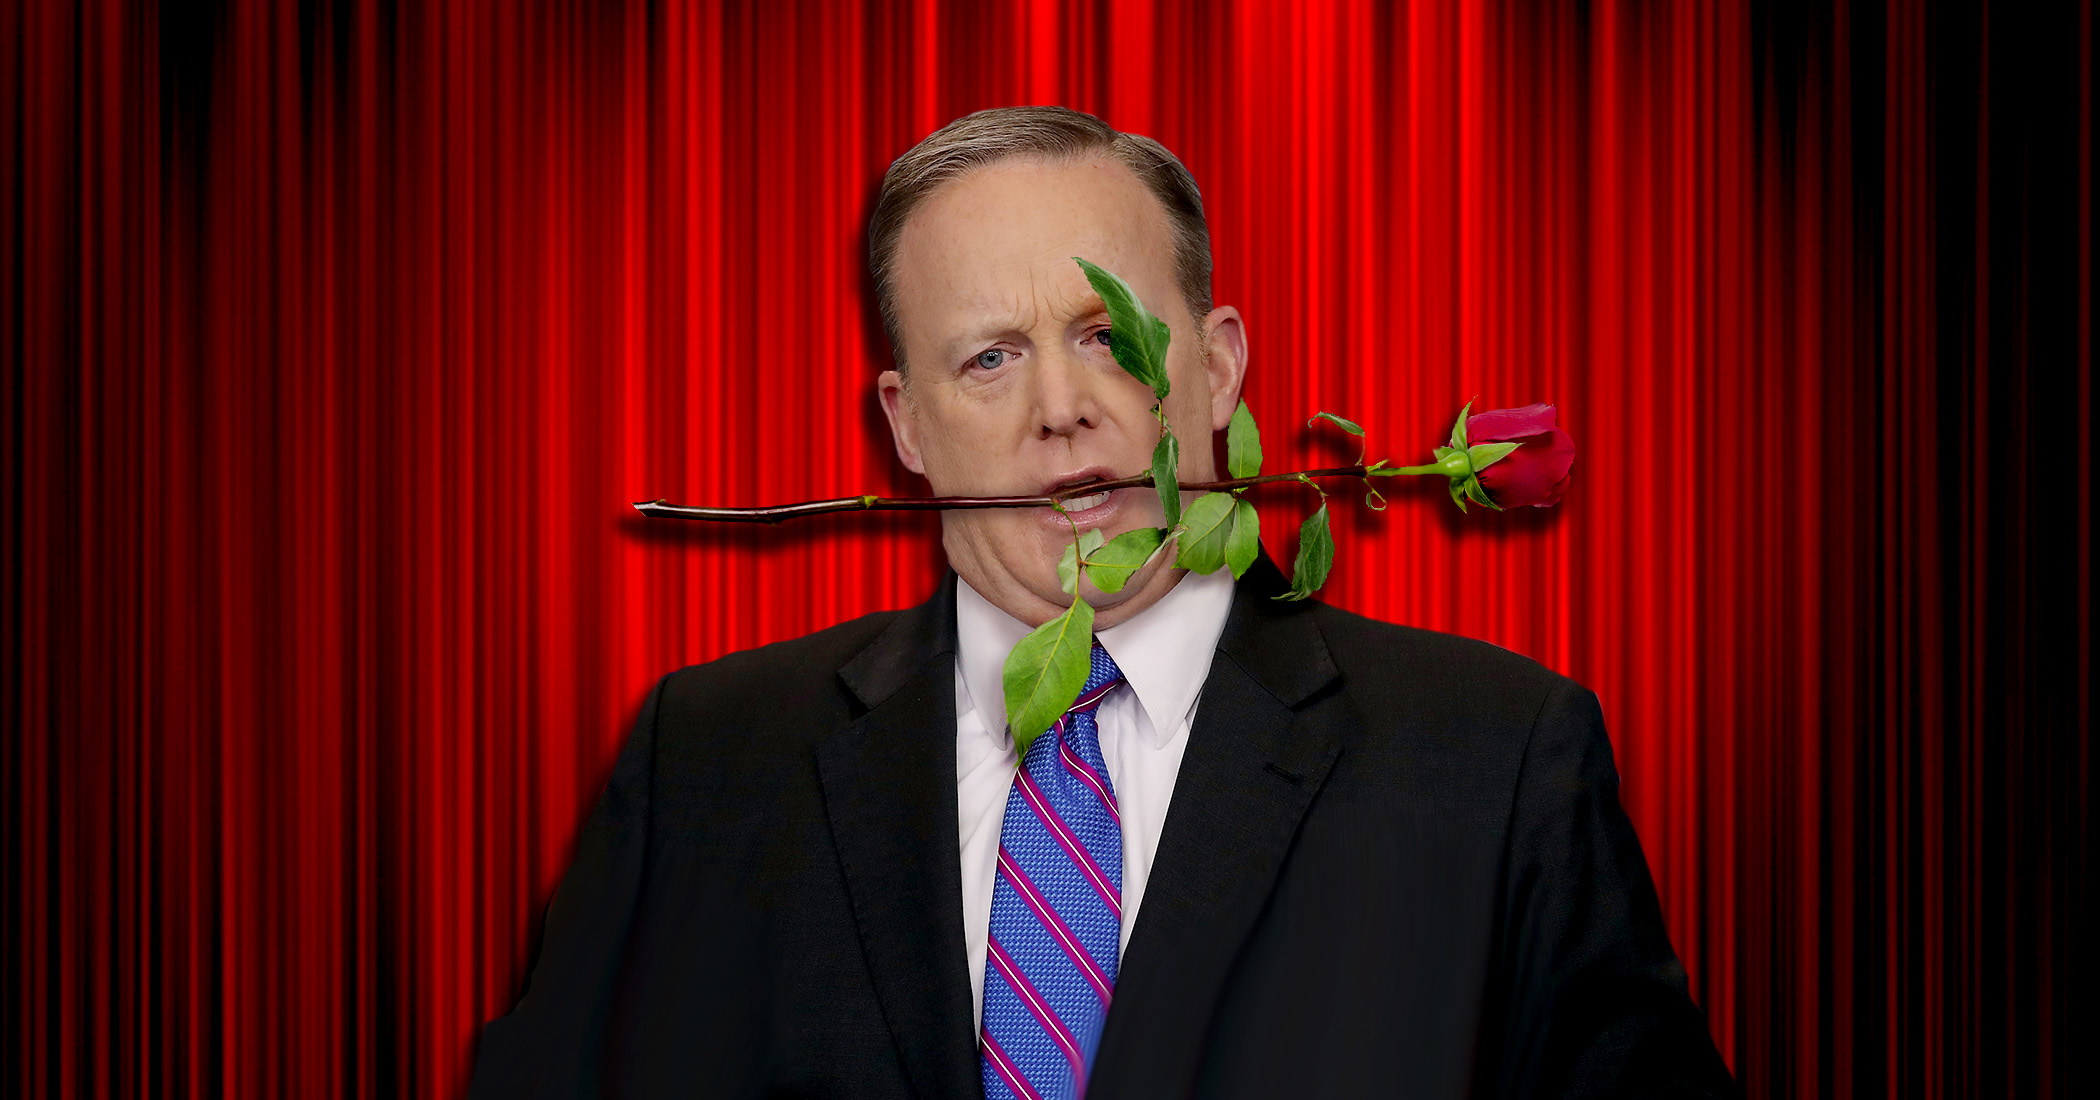 Former White House Press Secretary Sean Spicer with a rose in his mouth.